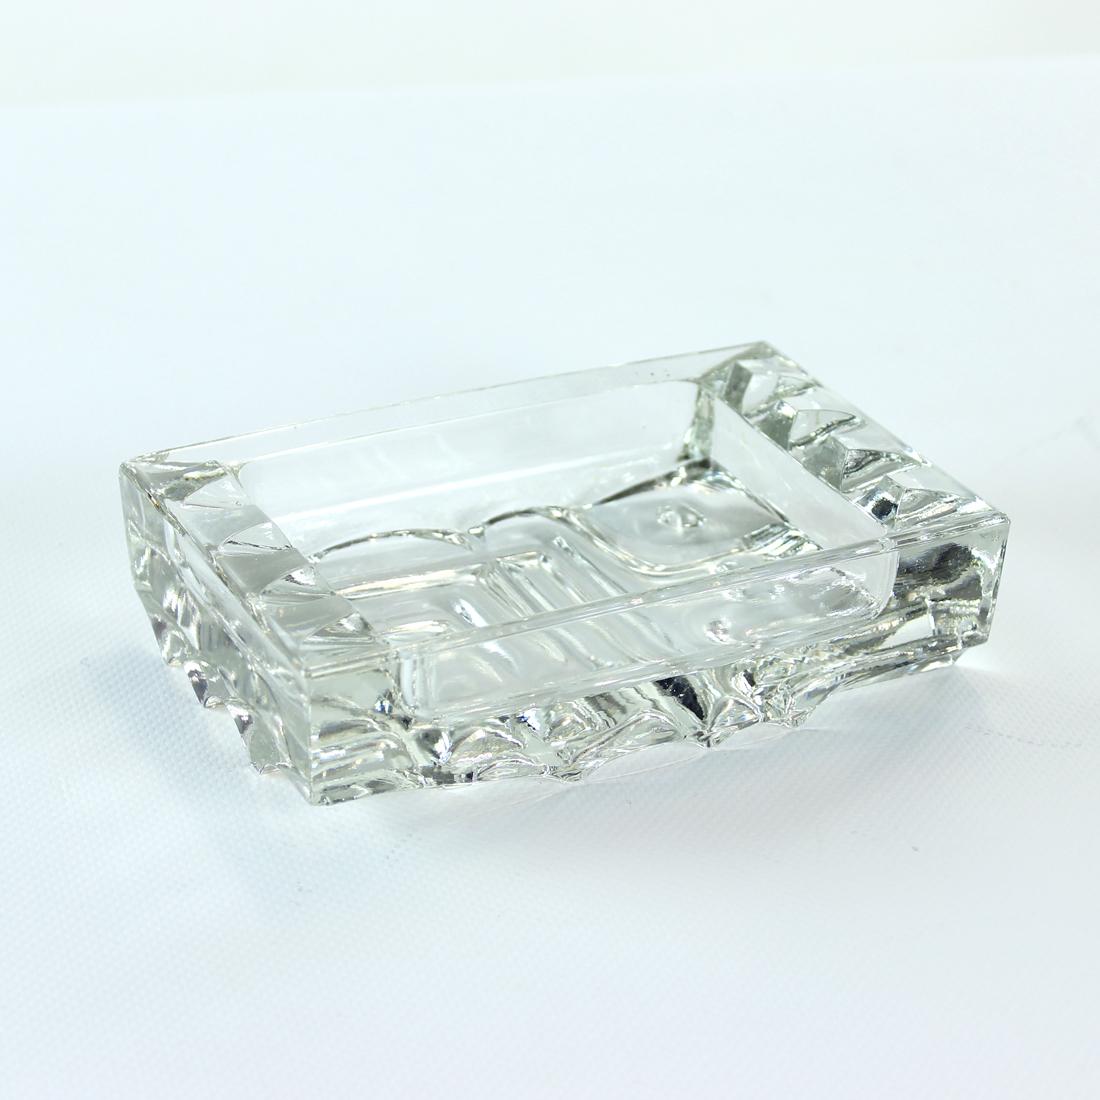 Beautiful mid-century ashtray produced from pressed glass. Designer is Vladislav Urban who produced this model as a part of his psychedelic collection where he started to use the sculptural characteristics of glass for dayly use objects. These